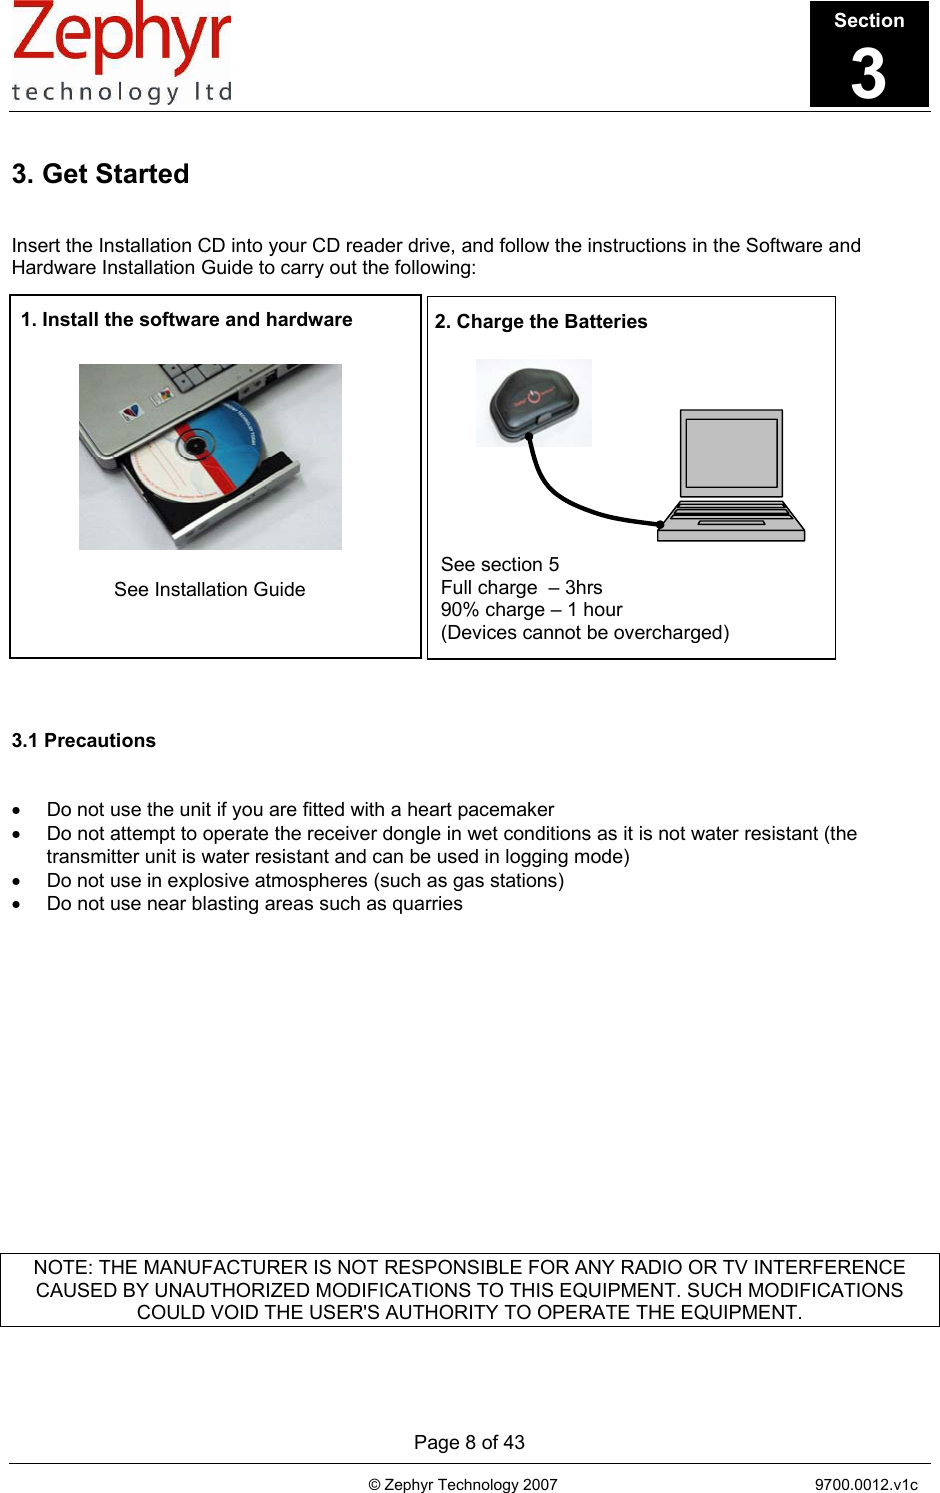       Page 8 of 43                                                                                   © Zephyr Technology 2007                                                           9700.0012.v1c                                         1. Install the software and hardware  See Installation Guide 2. Charge the Batteries See section 5 Full charge  – 3hrs 90% charge – 1 hour (Devices cannot be overcharged) 3. Get Started   Insert the Installation CD into your CD reader drive, and follow the instructions in the Software and Hardware Installation Guide to carry out the following:                     3.1 Precautions   •  Do not use the unit if you are fitted with a heart pacemaker •  Do not attempt to operate the receiver dongle in wet conditions as it is not water resistant (the transmitter unit is water resistant and can be used in logging mode) •  Do not use in explosive atmospheres (such as gas stations) •  Do not use near blasting areas such as quarries                NOTE: THE MANUFACTURER IS NOT RESPONSIBLE FOR ANY RADIO OR TV INTERFERENCE CAUSED BY UNAUTHORIZED MODIFICATIONS TO THIS EQUIPMENT. SUCH MODIFICATIONS COULD VOID THE USER&apos;S AUTHORITY TO OPERATE THE EQUIPMENT.  Section3 